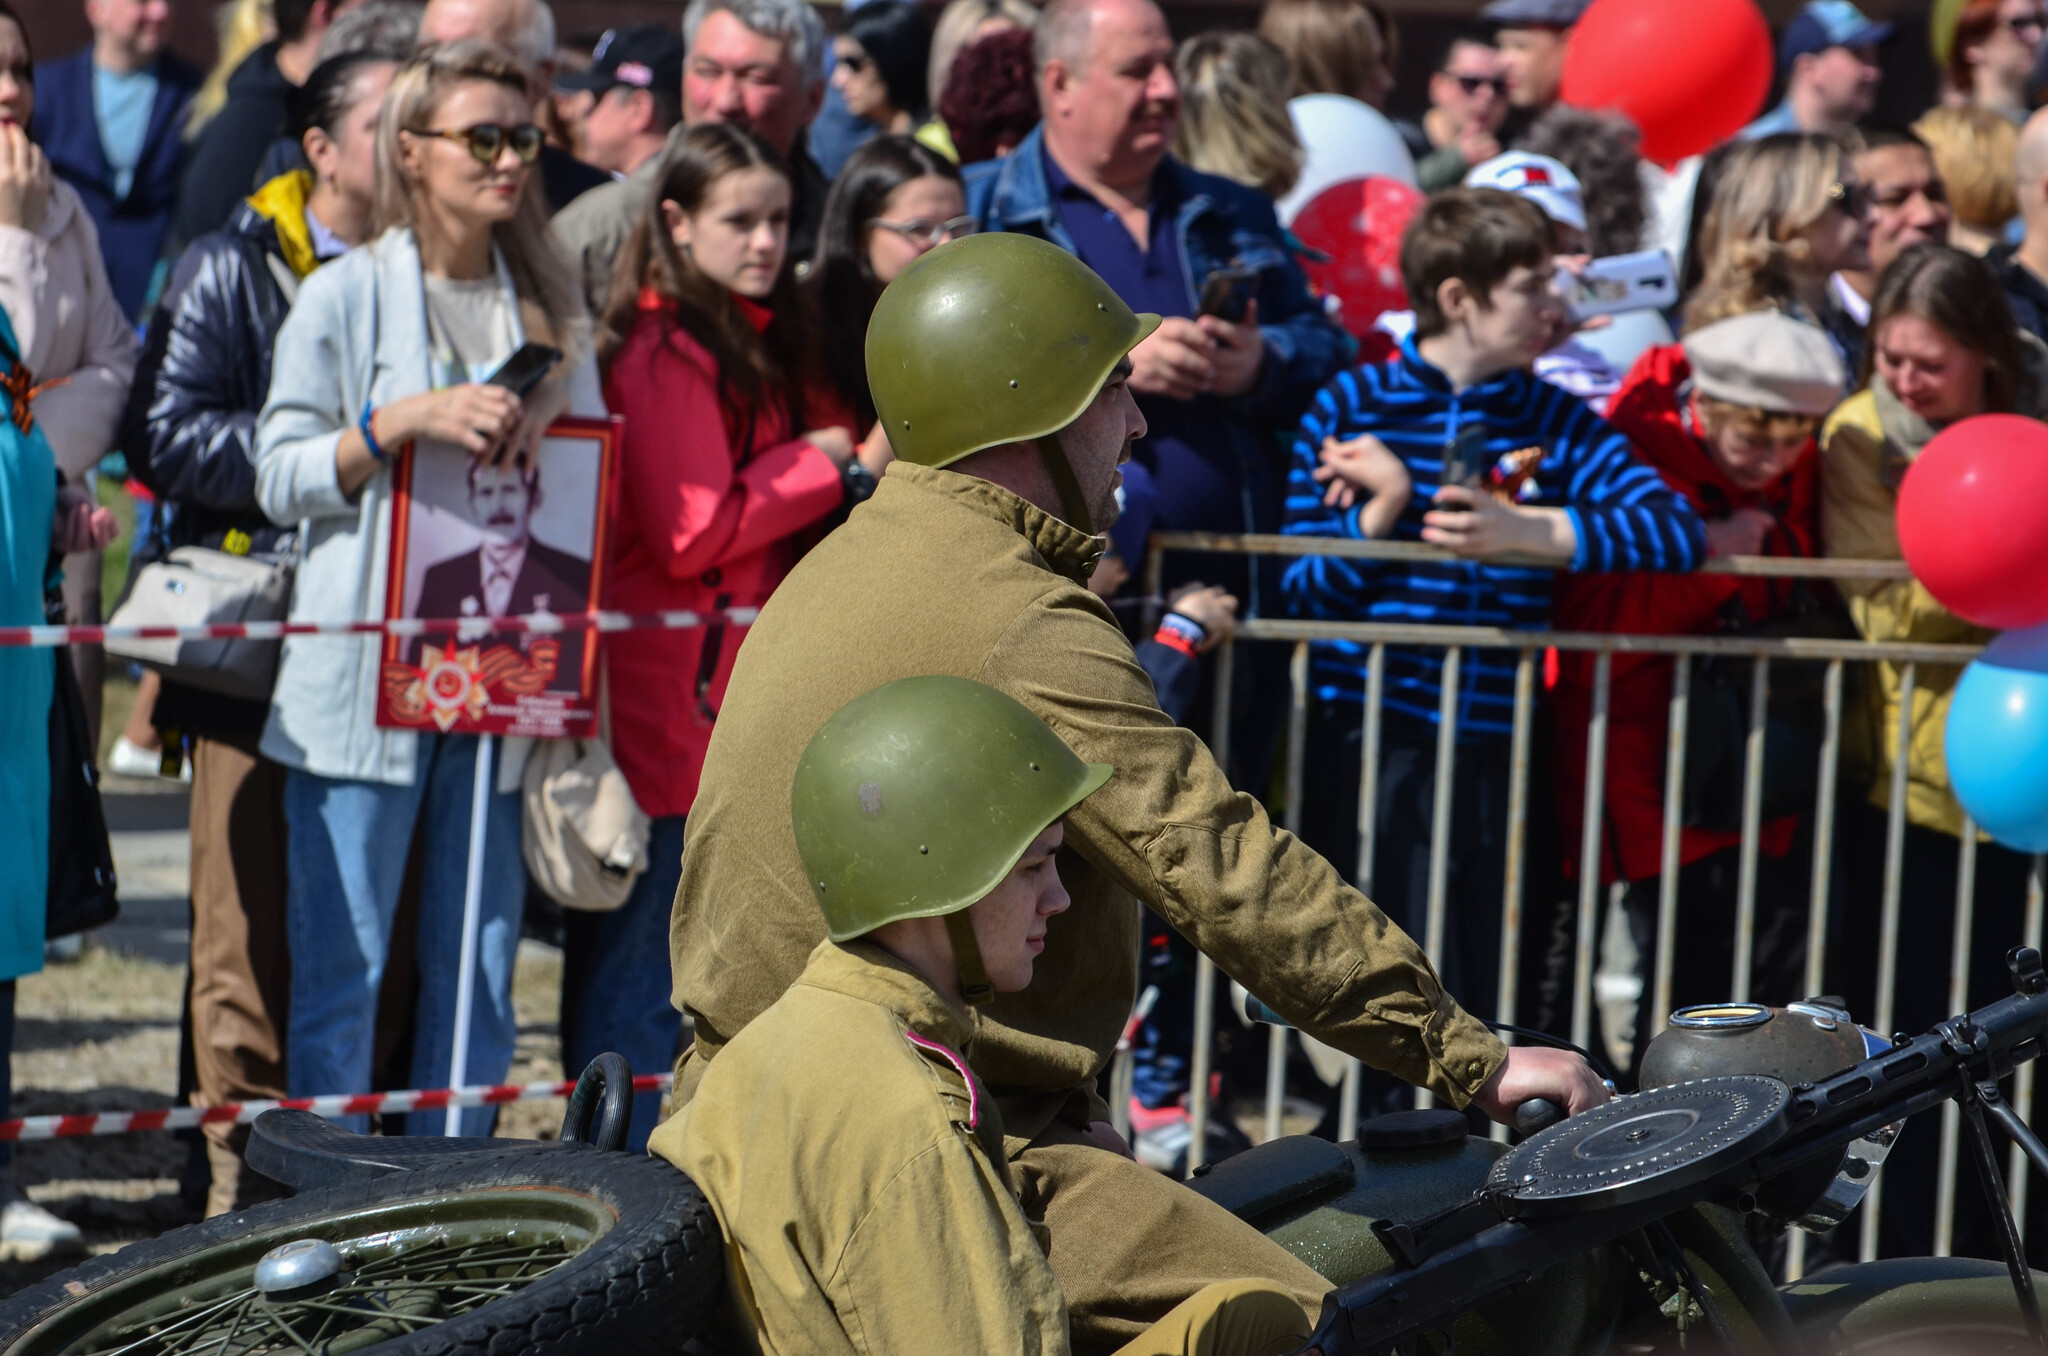 May 9 in Soviet / part 2 - My, May 9 - Victory Day, Soviet, KhMAO, The Great Patriotic War, Yugorsk, Victory parade, The Second World War, Airborne forces, Army, Red Army, Military equipment, Military, Paratroopers, Longpost